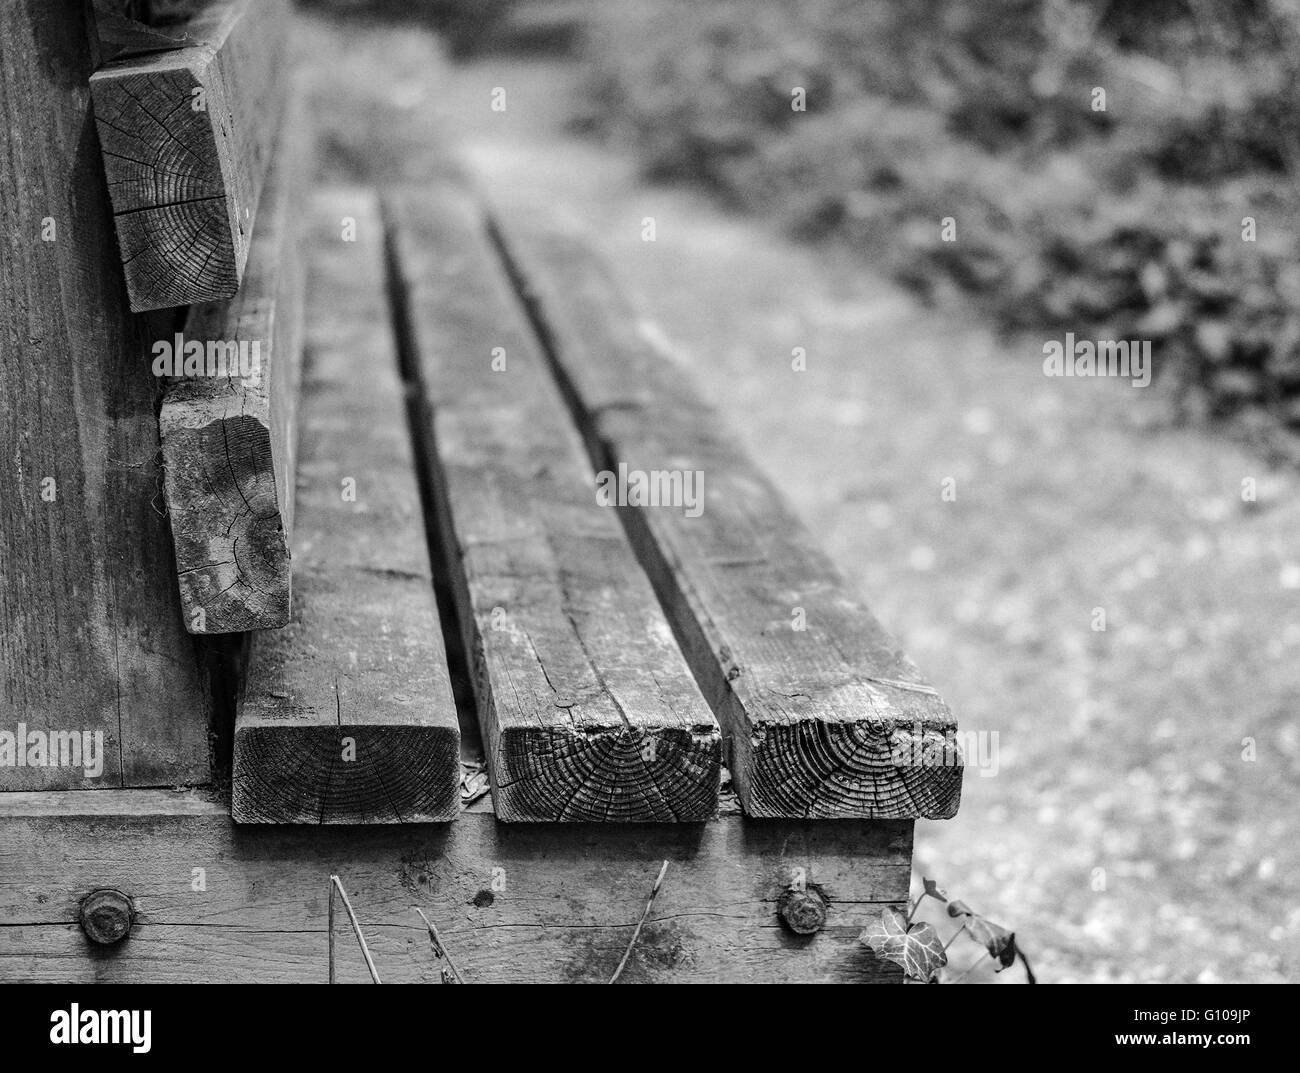 Empty timber built public bench seen on a footpath at the edge of a forest. Stock Photo